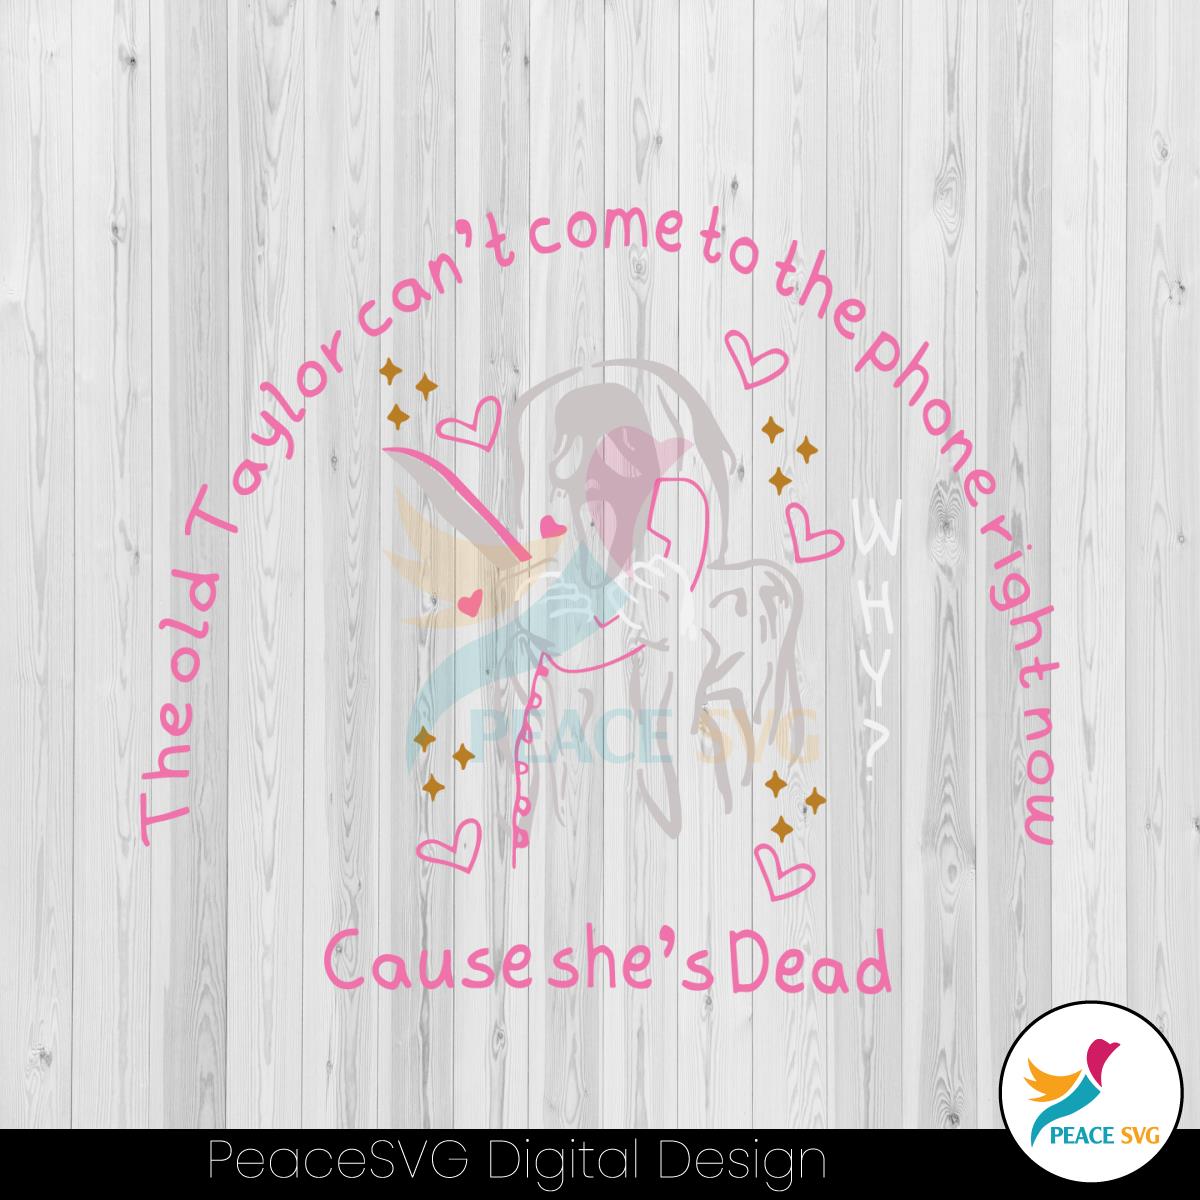 the-old-taylor-cant-come-cause-she-dead-svg-cricut-file